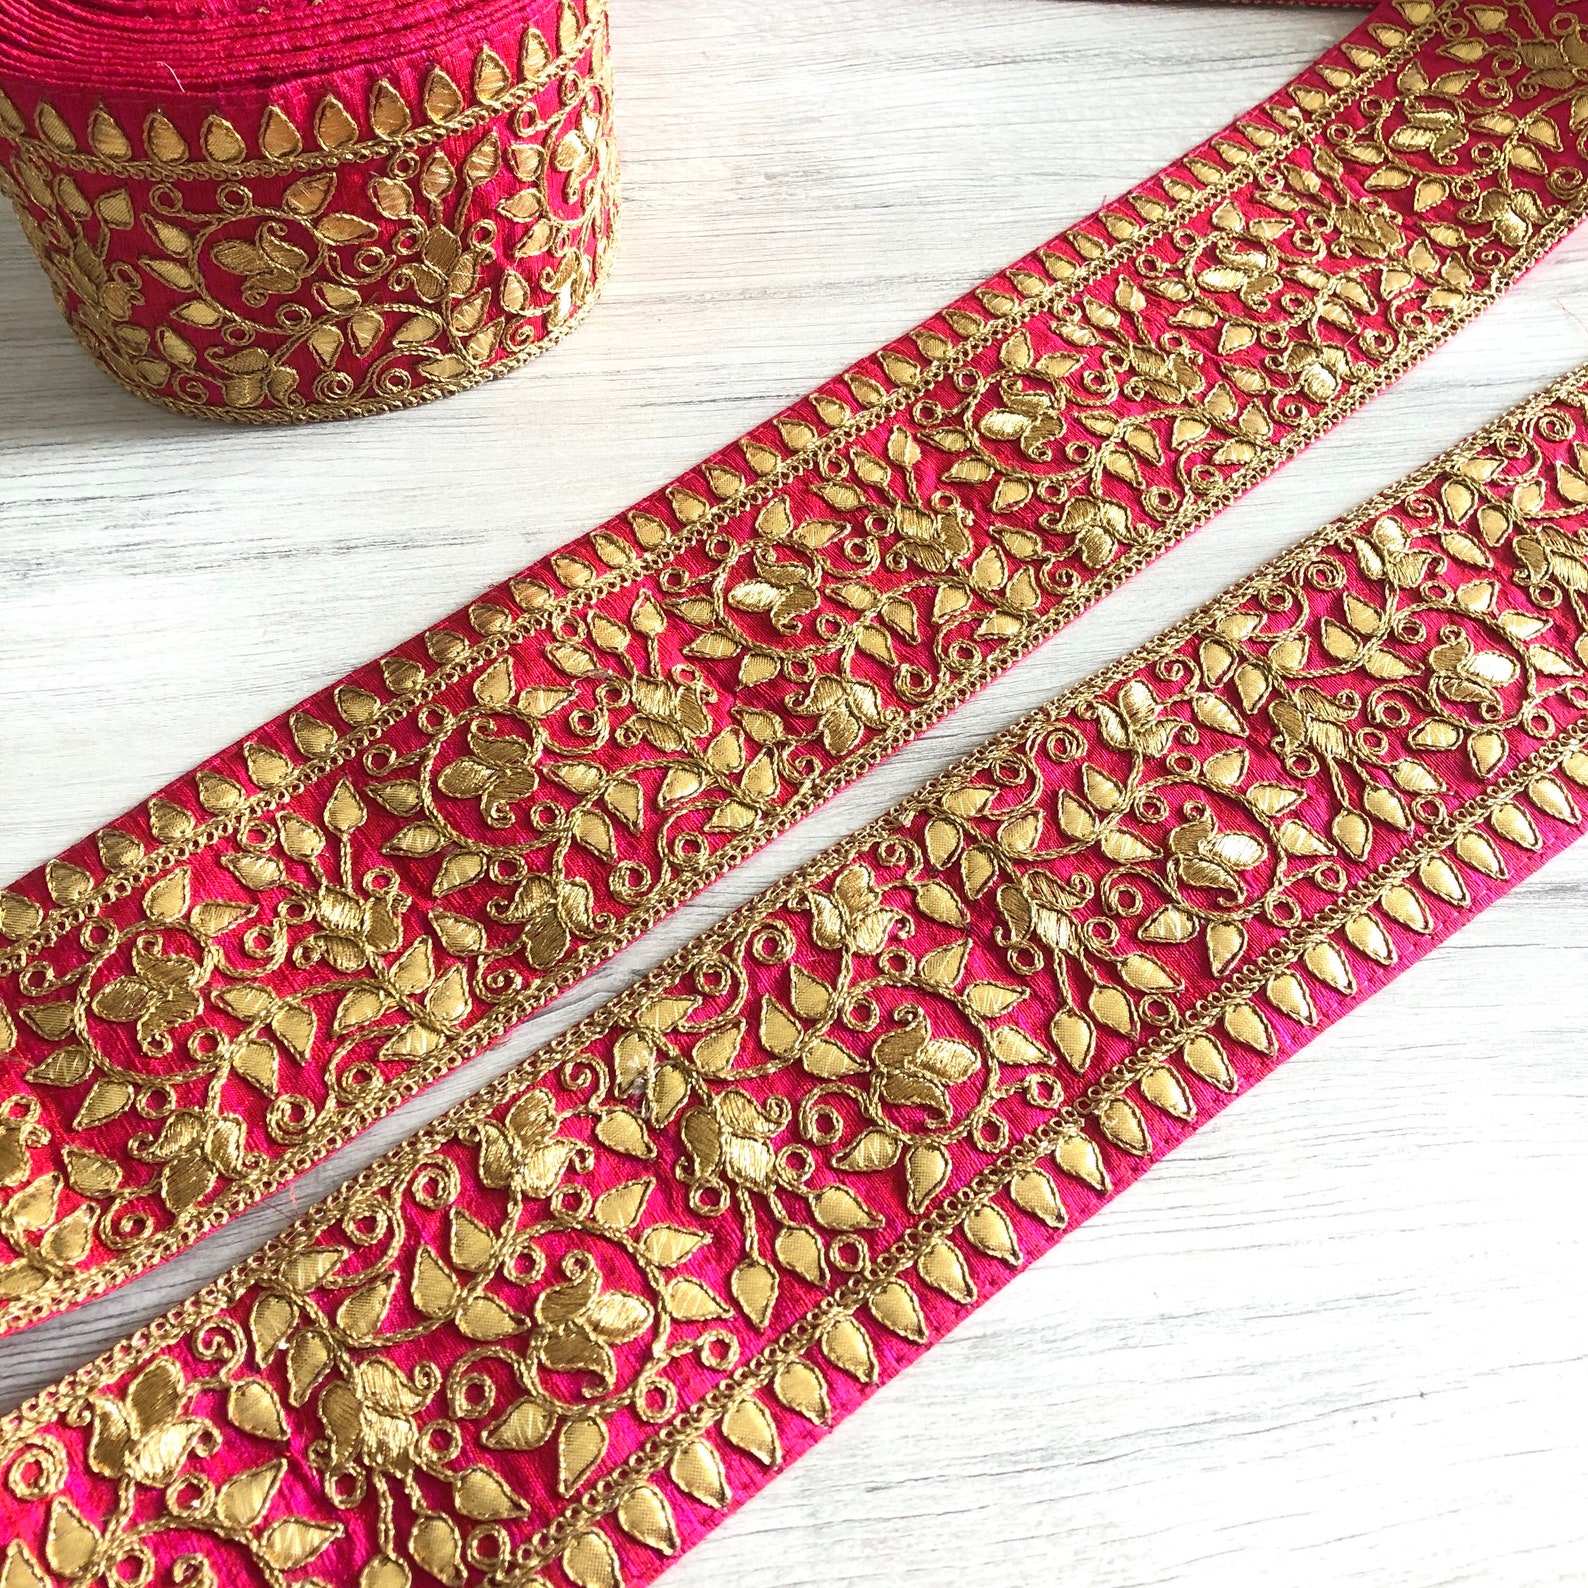 Saree Border Indian Lace Trim By The Yard Embroidered Ribbon Etsy